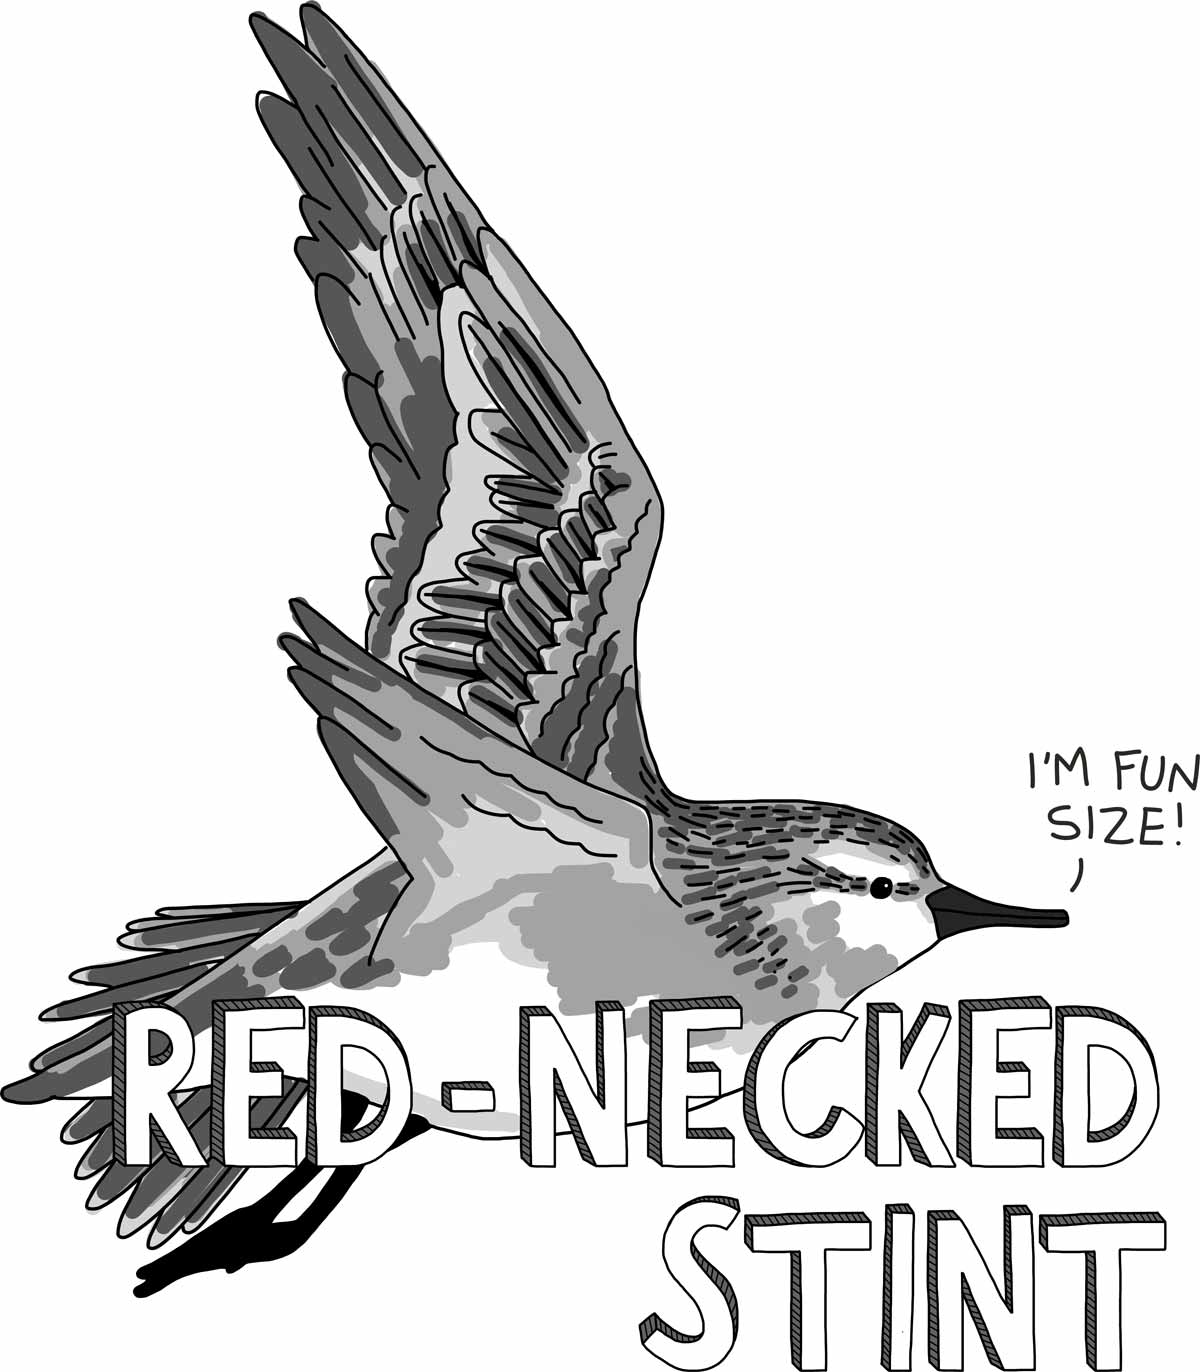 Cartoon of a red-necked stint in flight